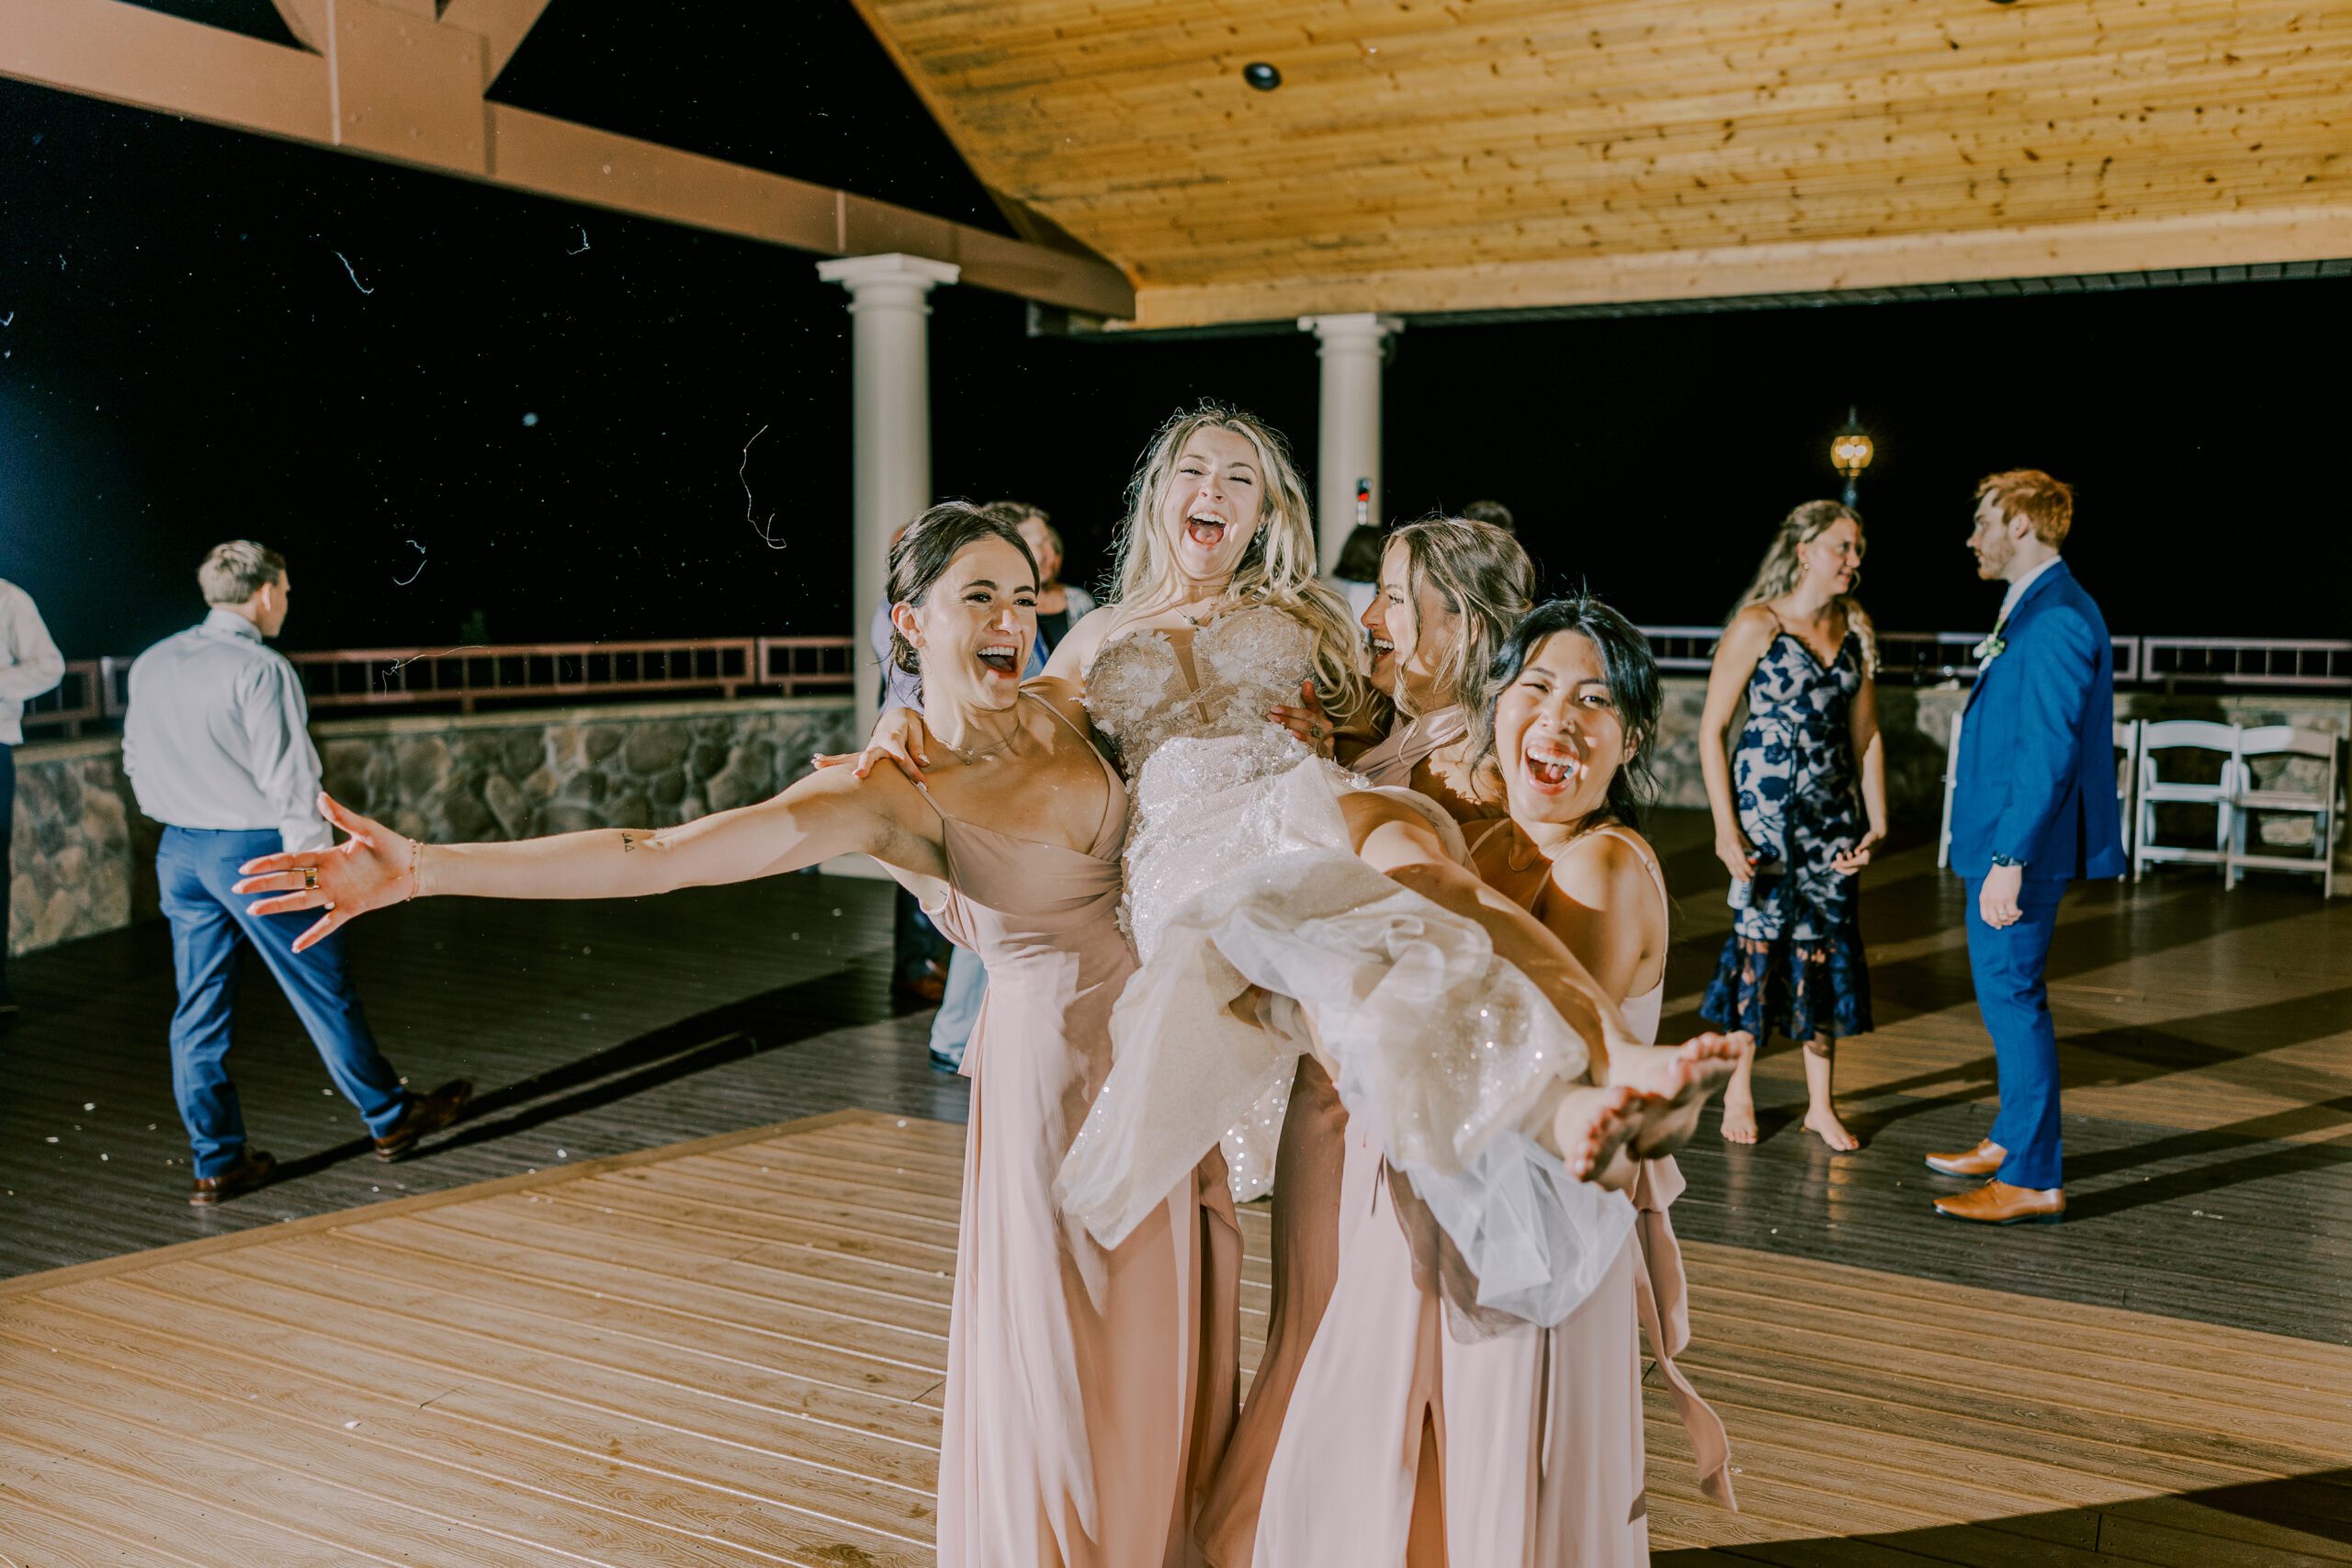 Three bridesmaids carrying bride on the dance floor